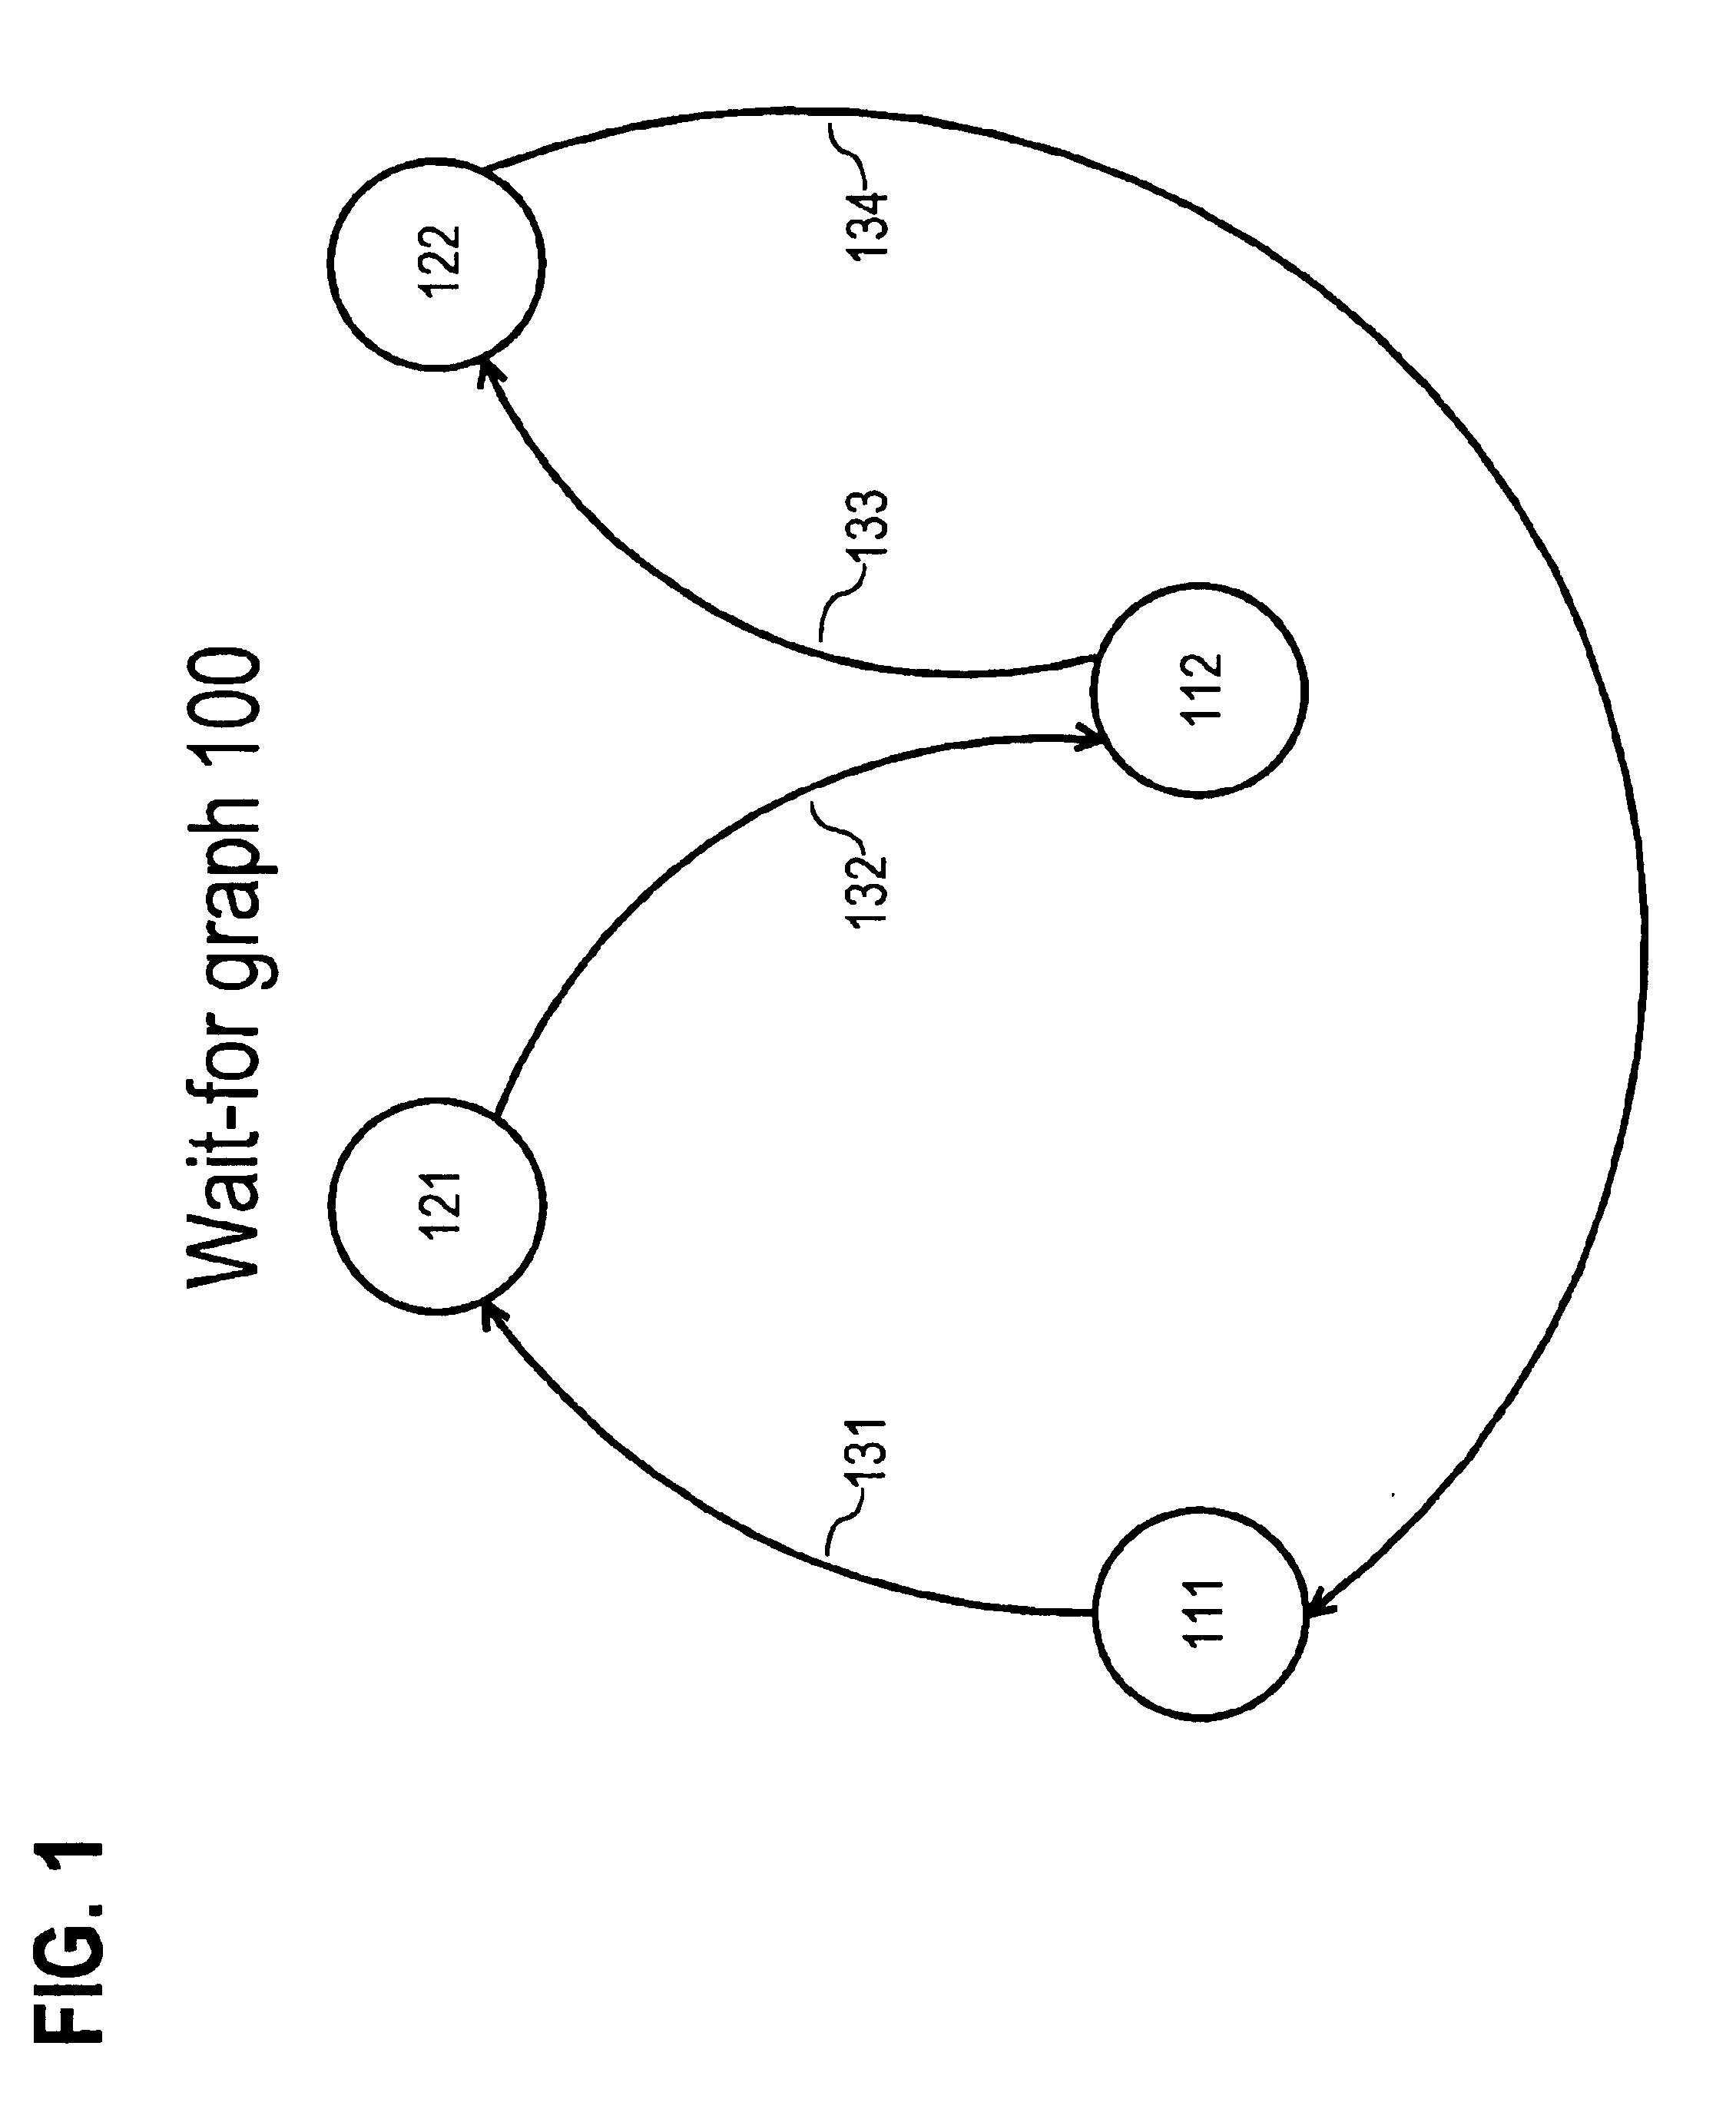 Determining and registering participants in a distributed transaction in response to commencing participation in said distributed transaction